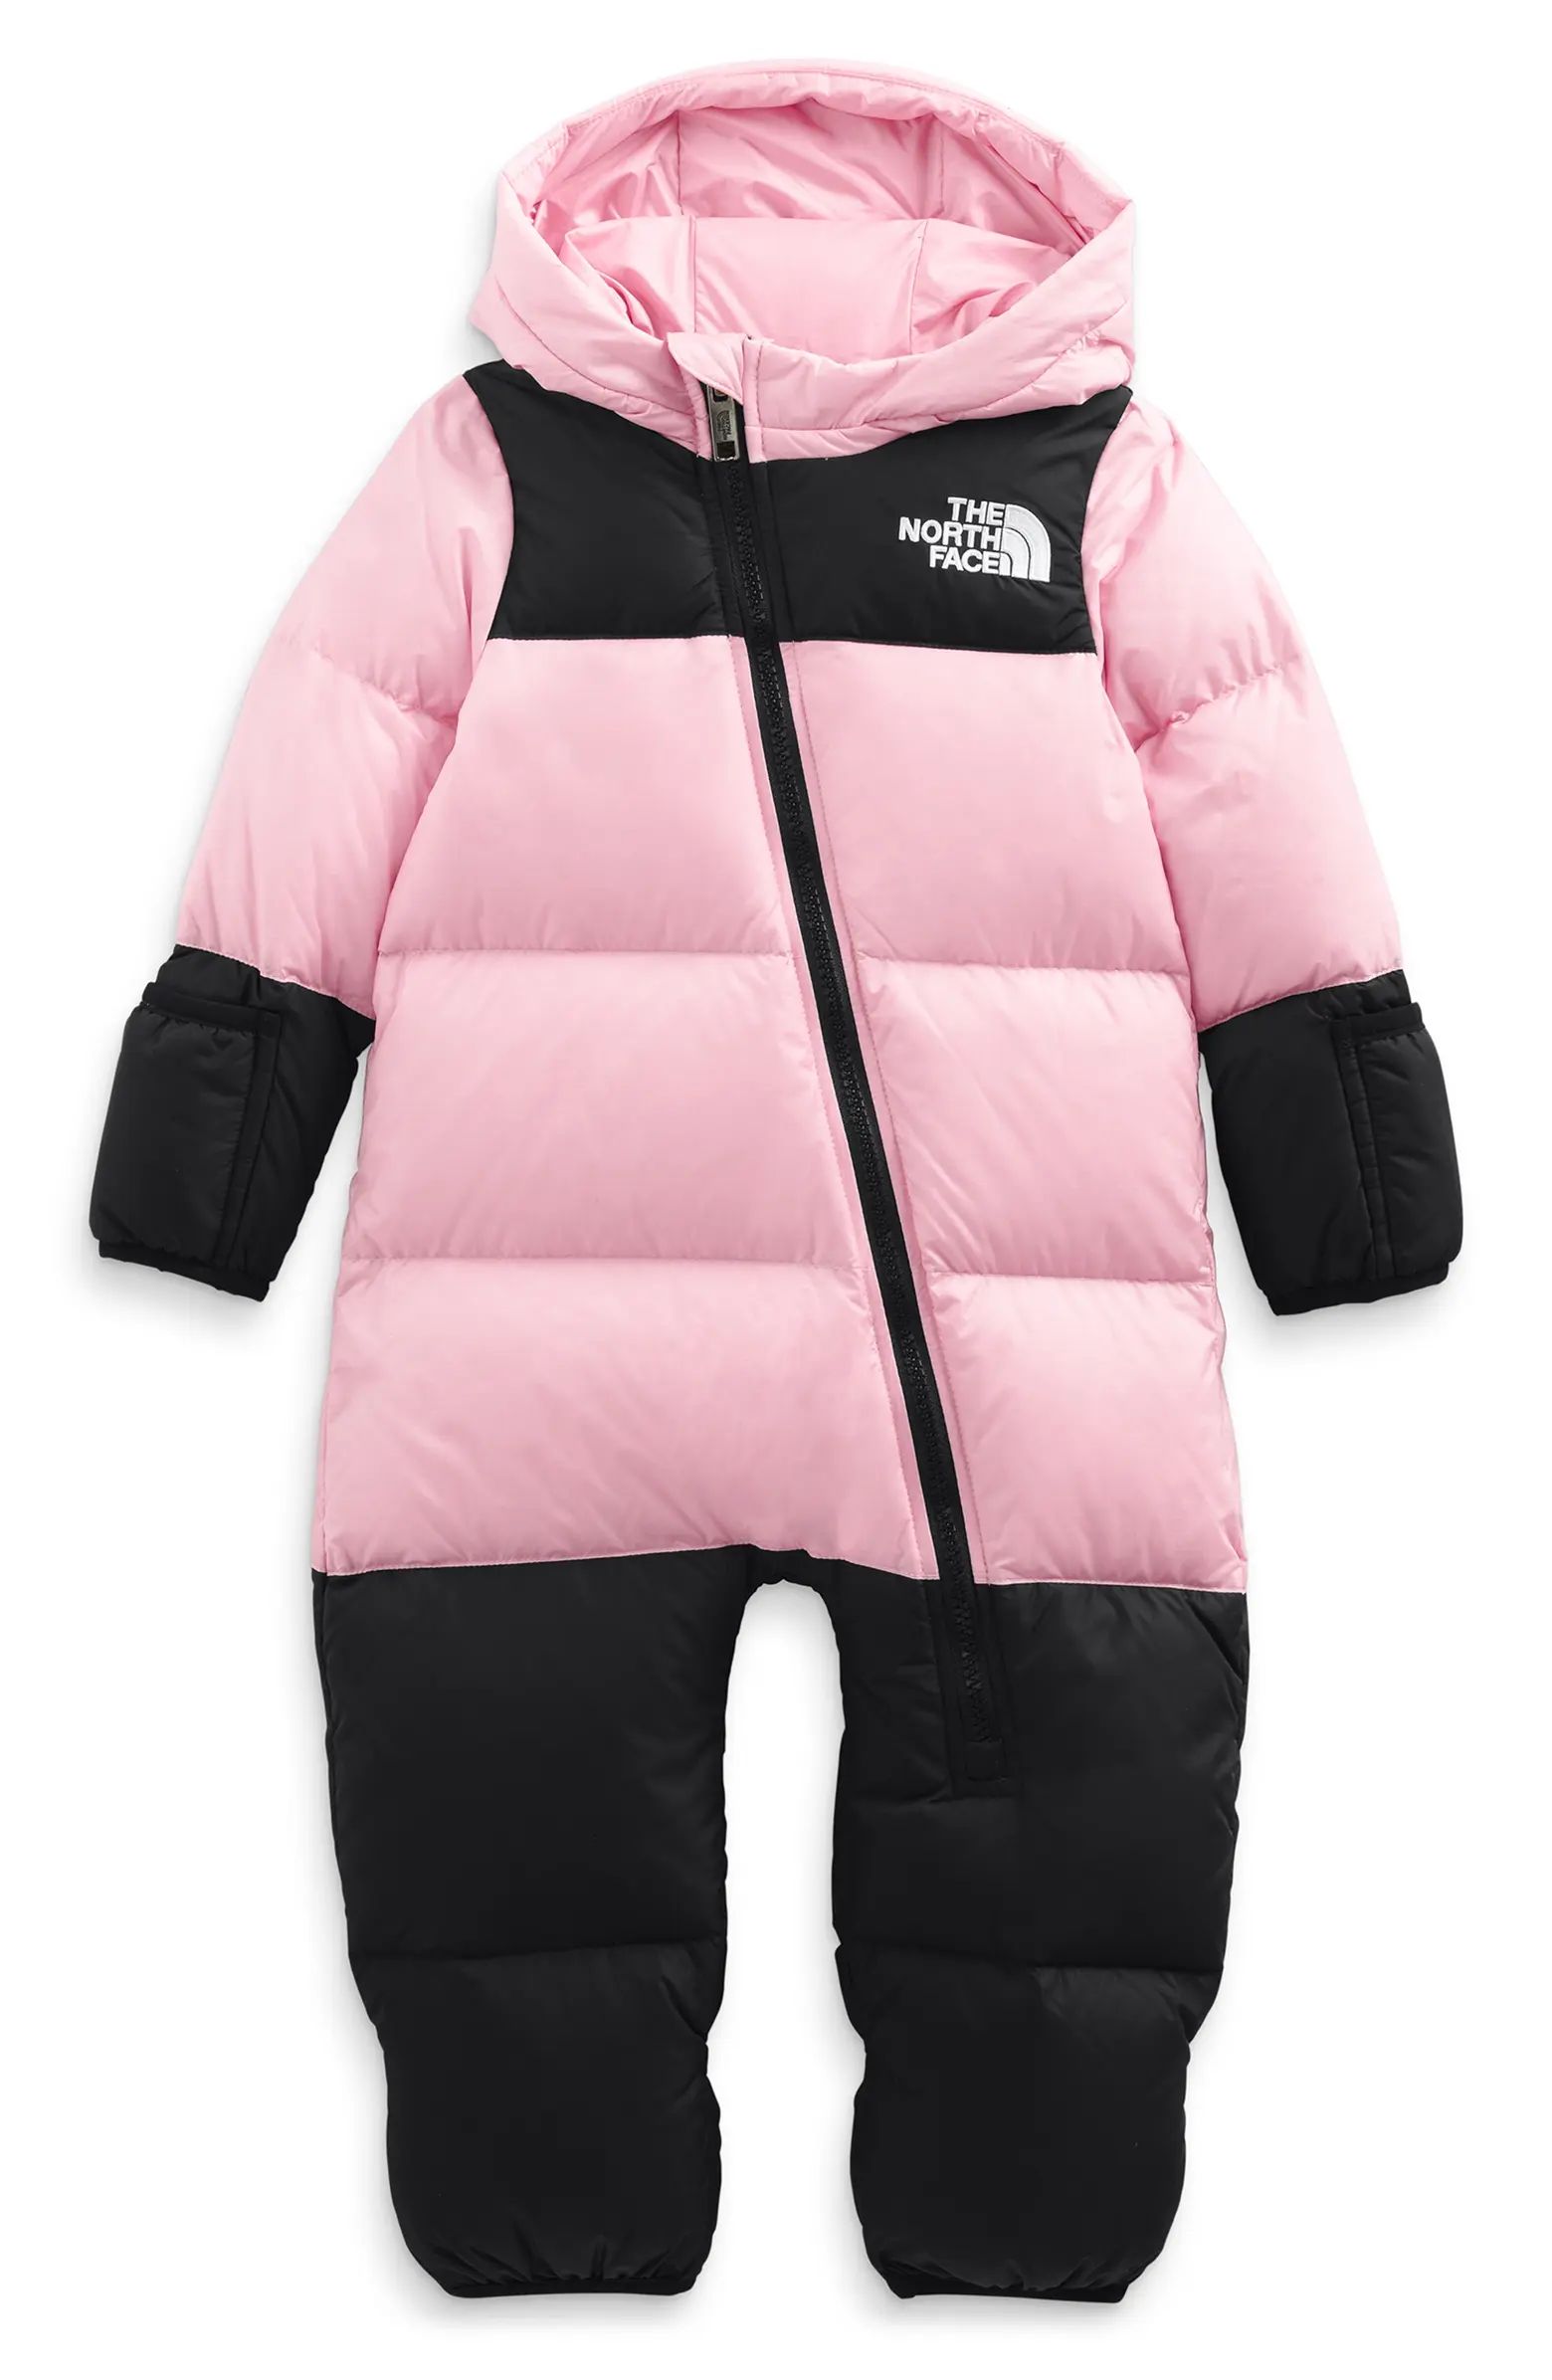 The North Face 1996 Retro Nuptse 700 Fill Power Down Bunting | Nordstrom | Nordstrom